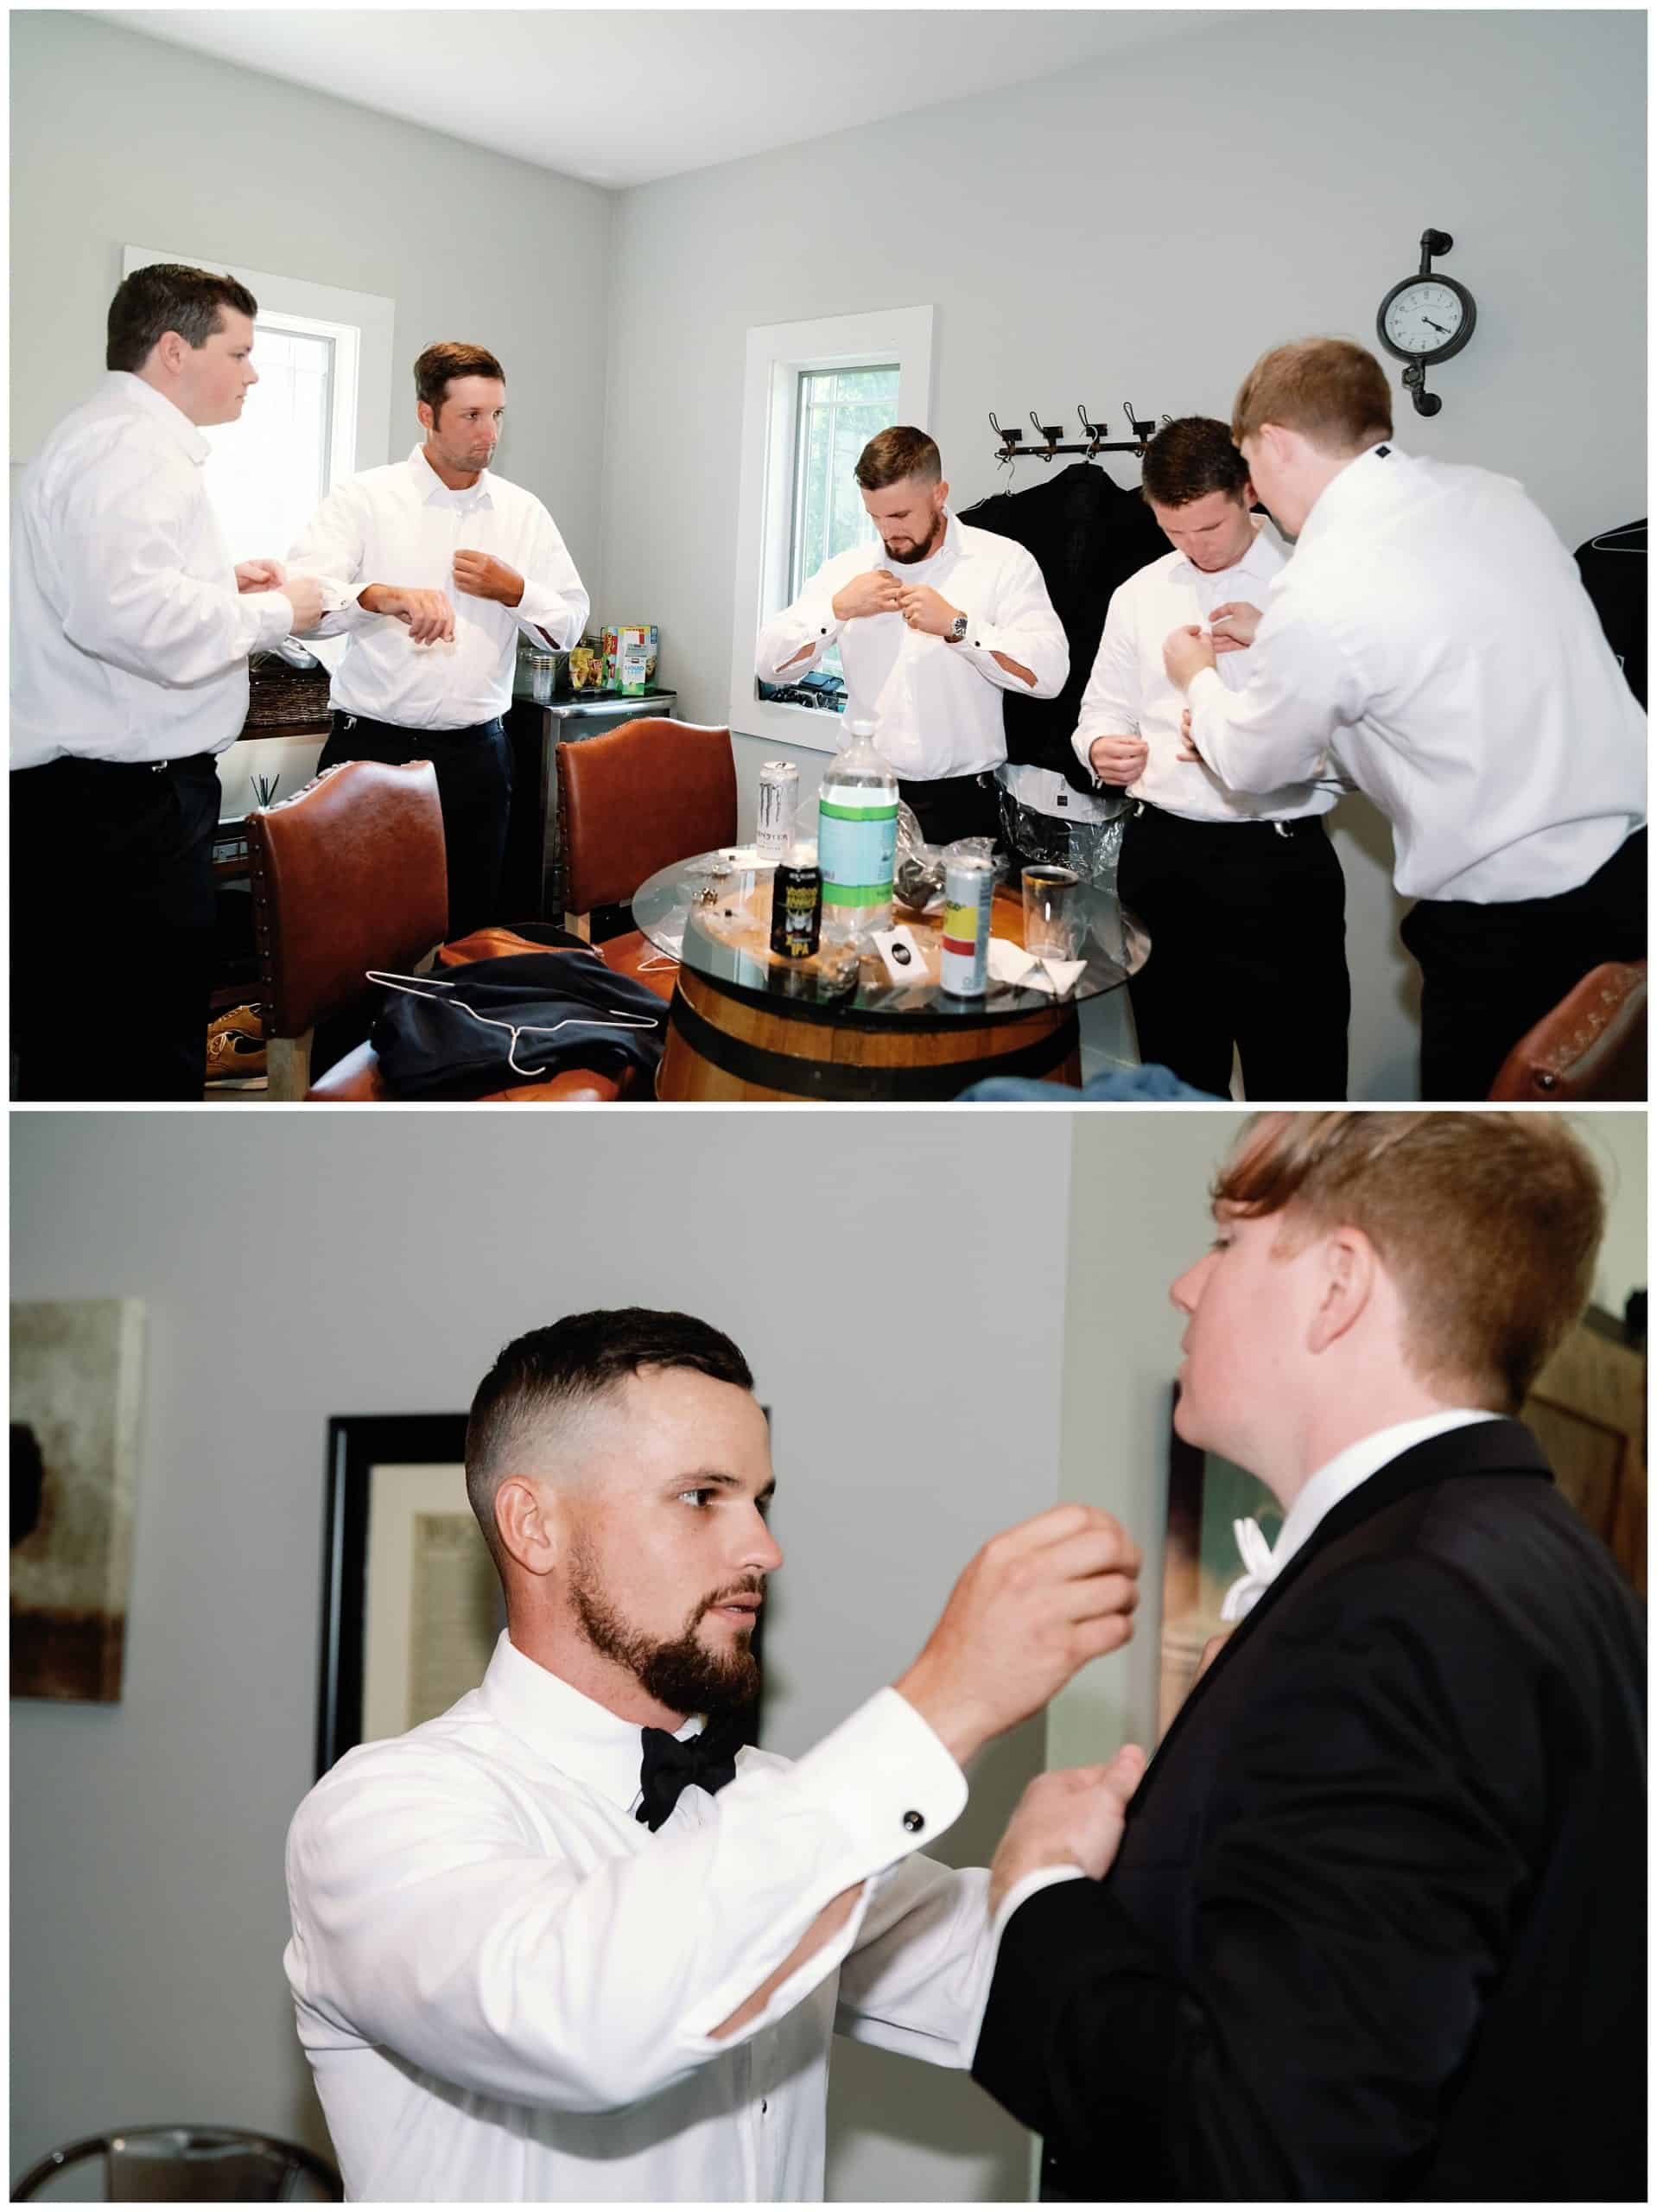 A group of men are getting ready for a wedding.